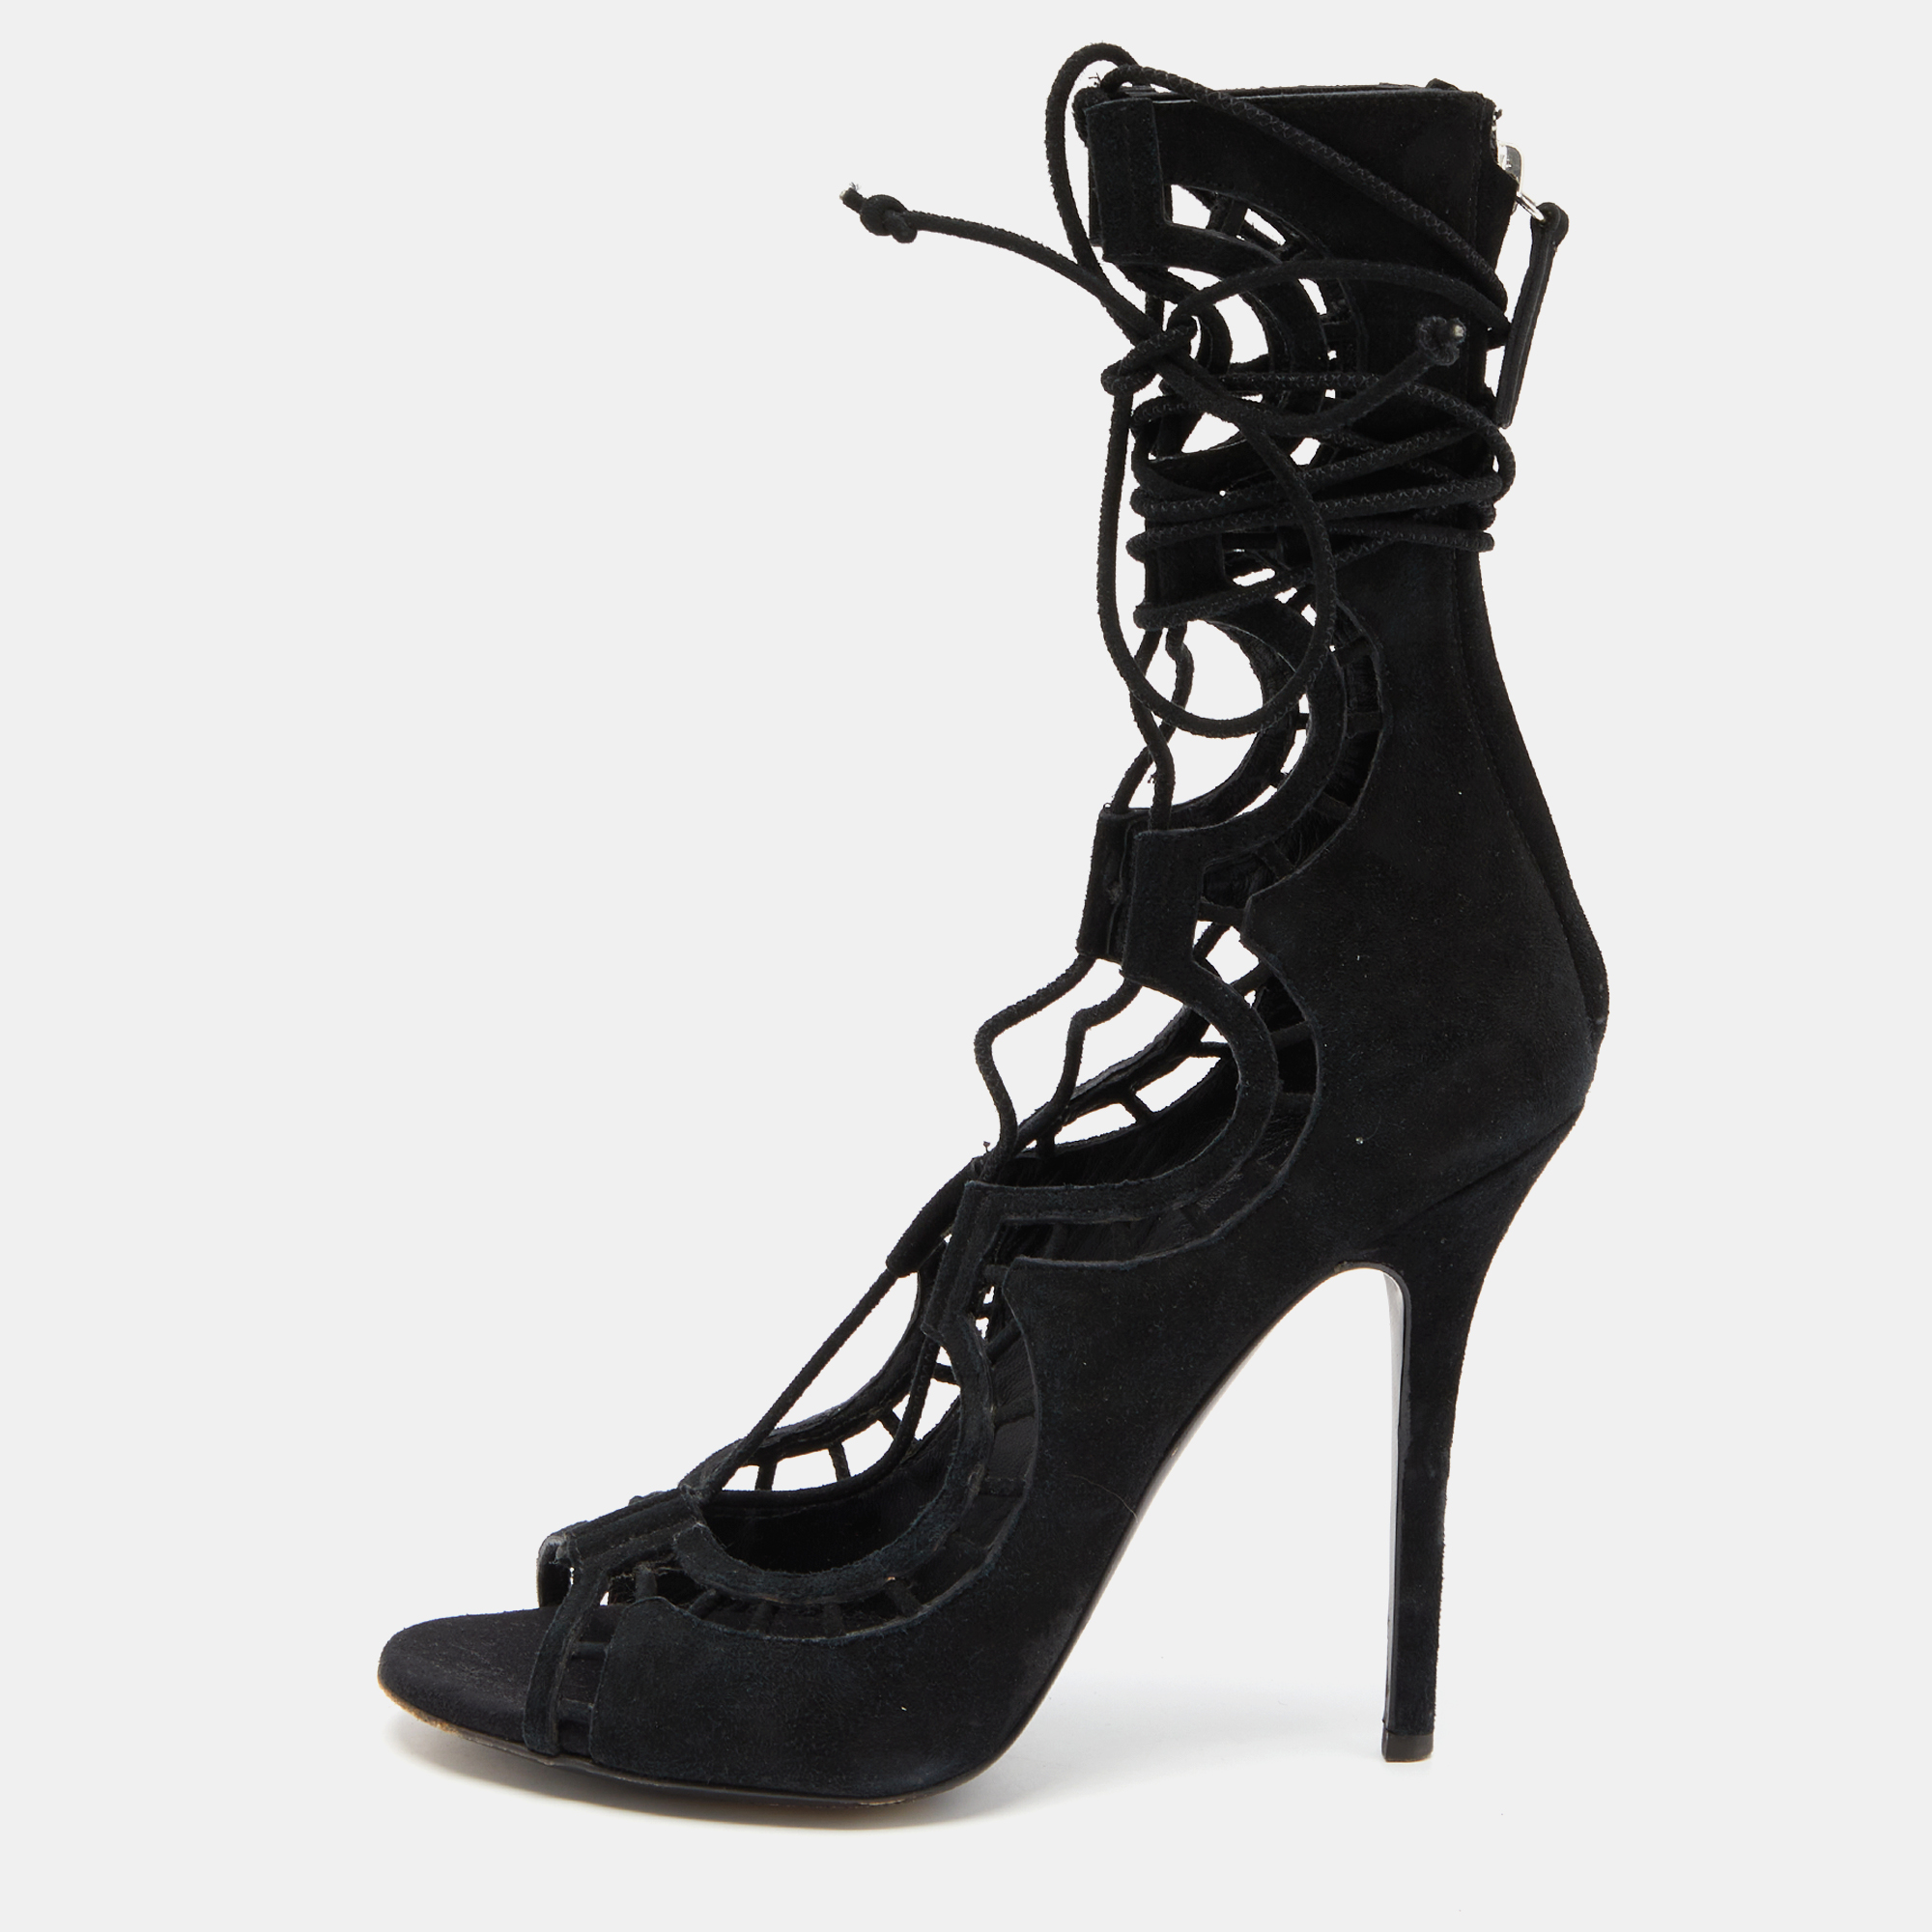 Pre-owned Giuseppe Zanotti Black Suede Cut Out Strappy High Peep Toe Sandals Size 38.5